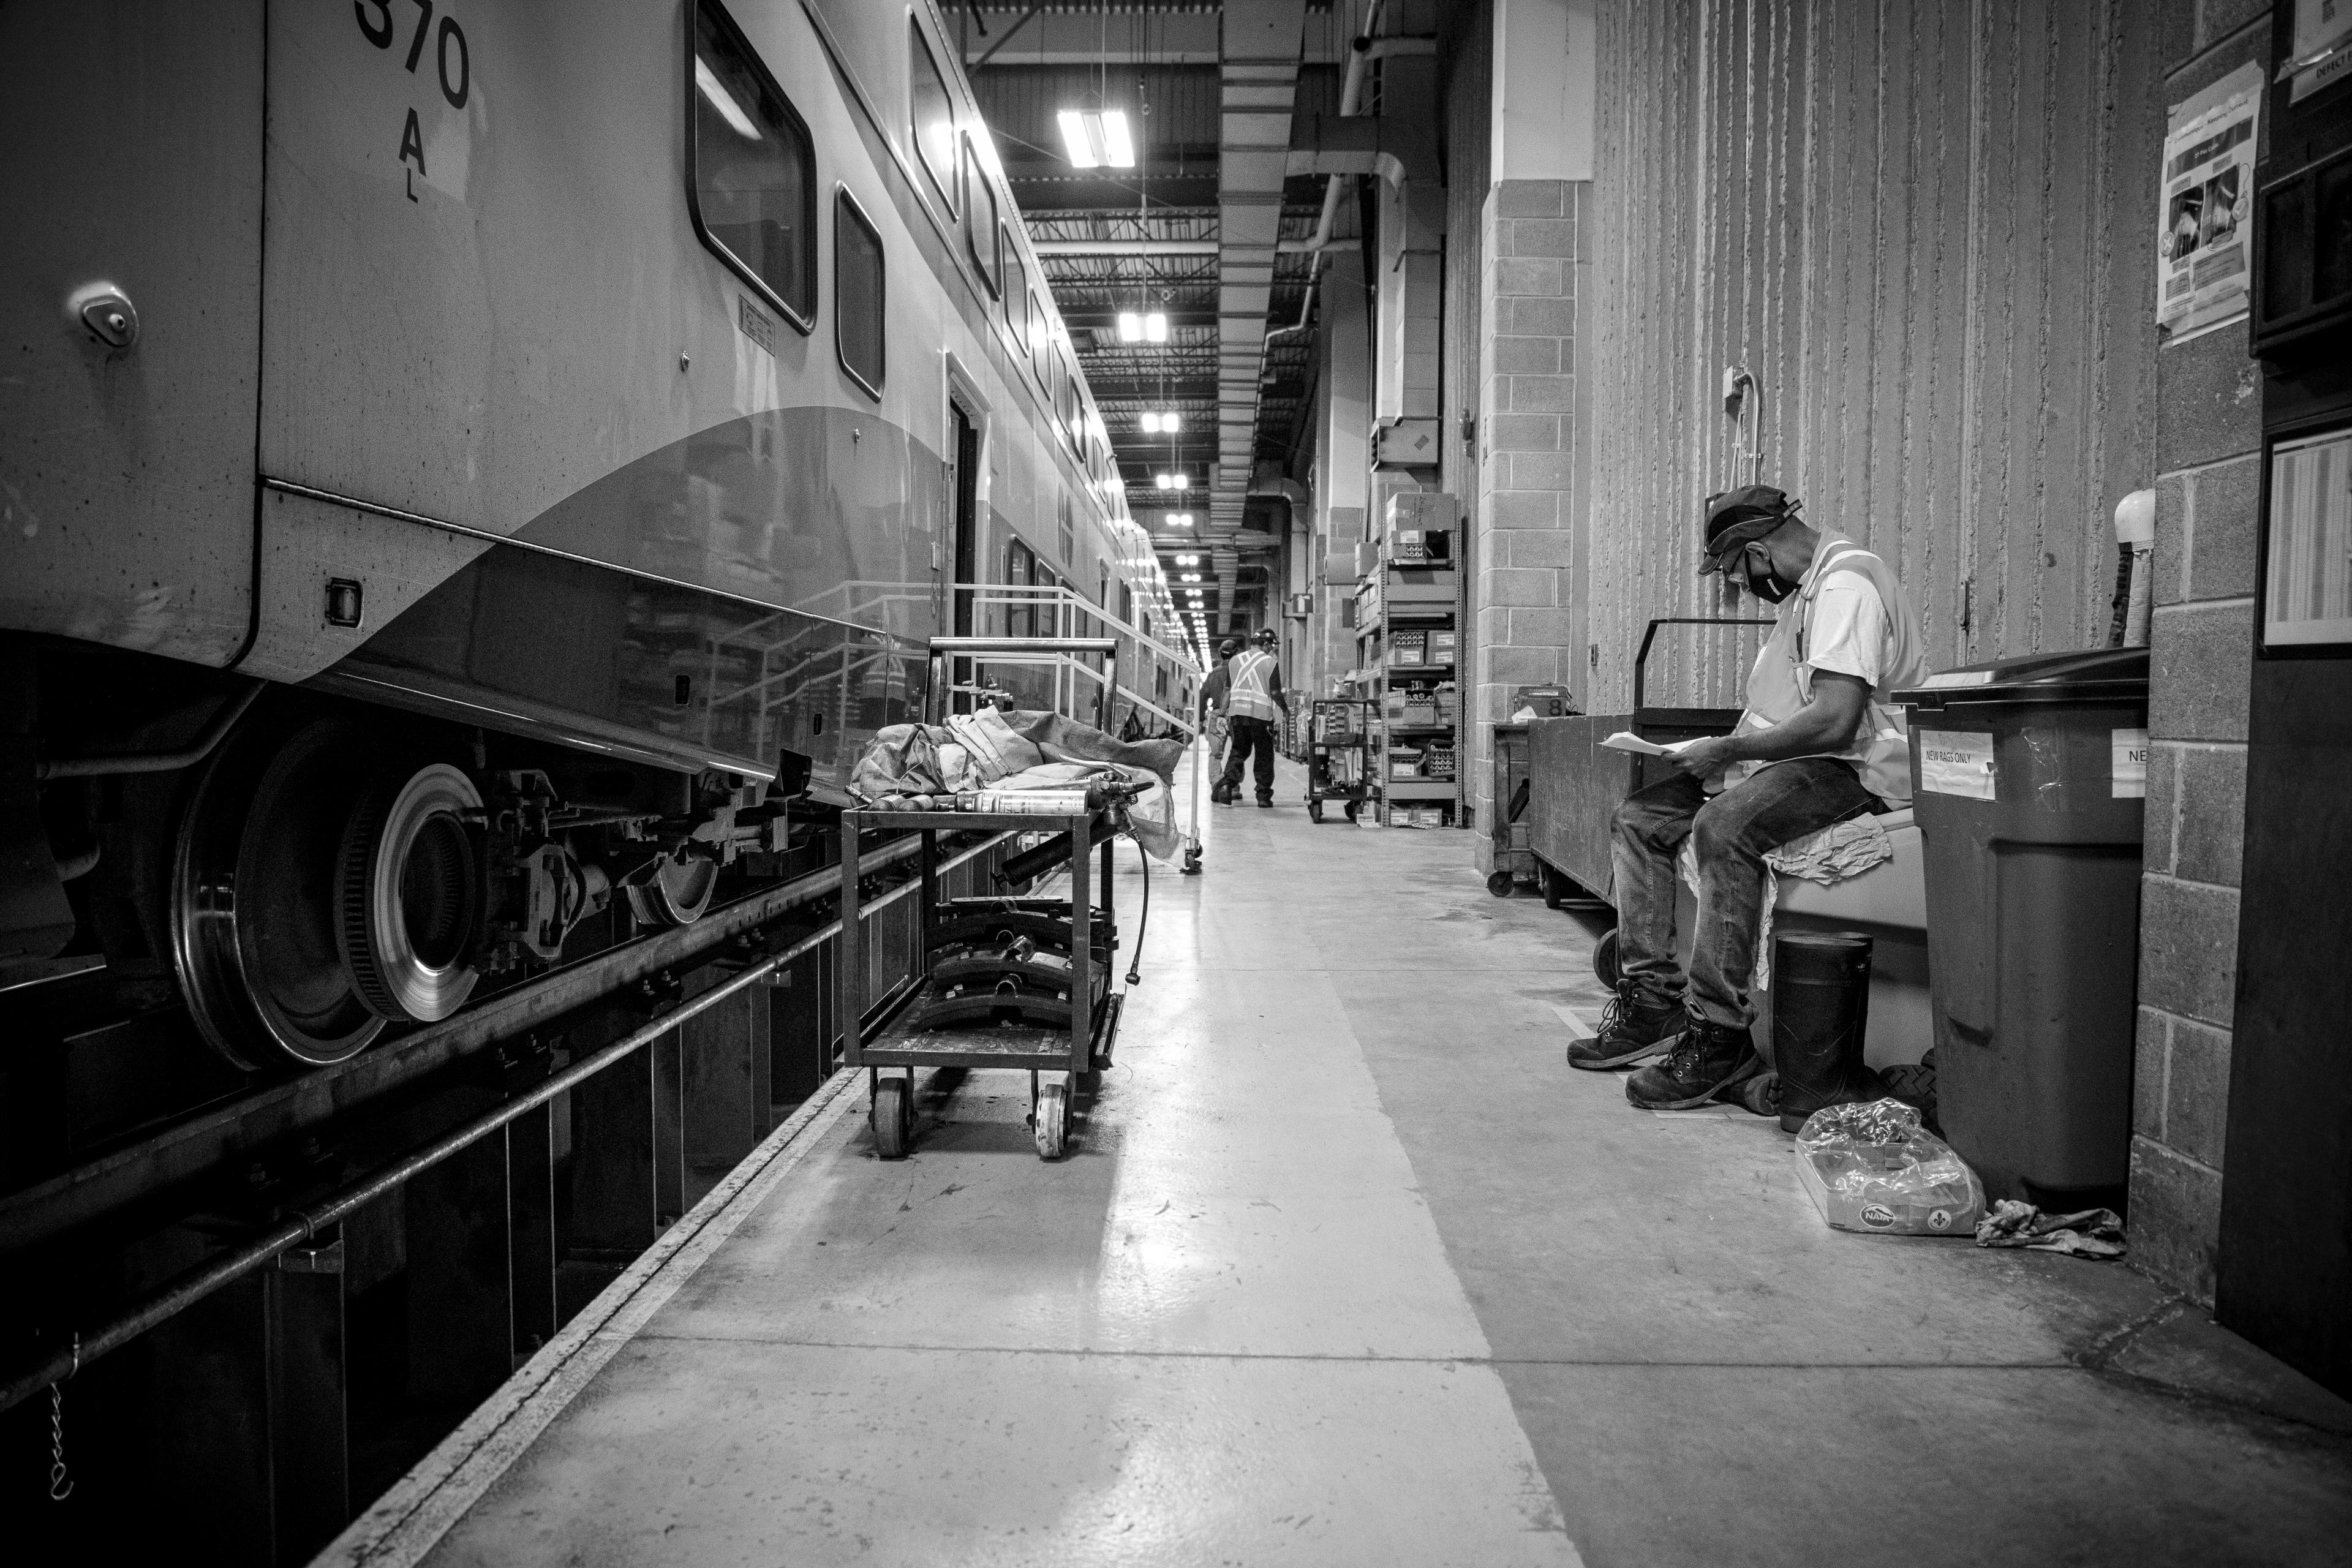 A worker sits next to a train to do some work.